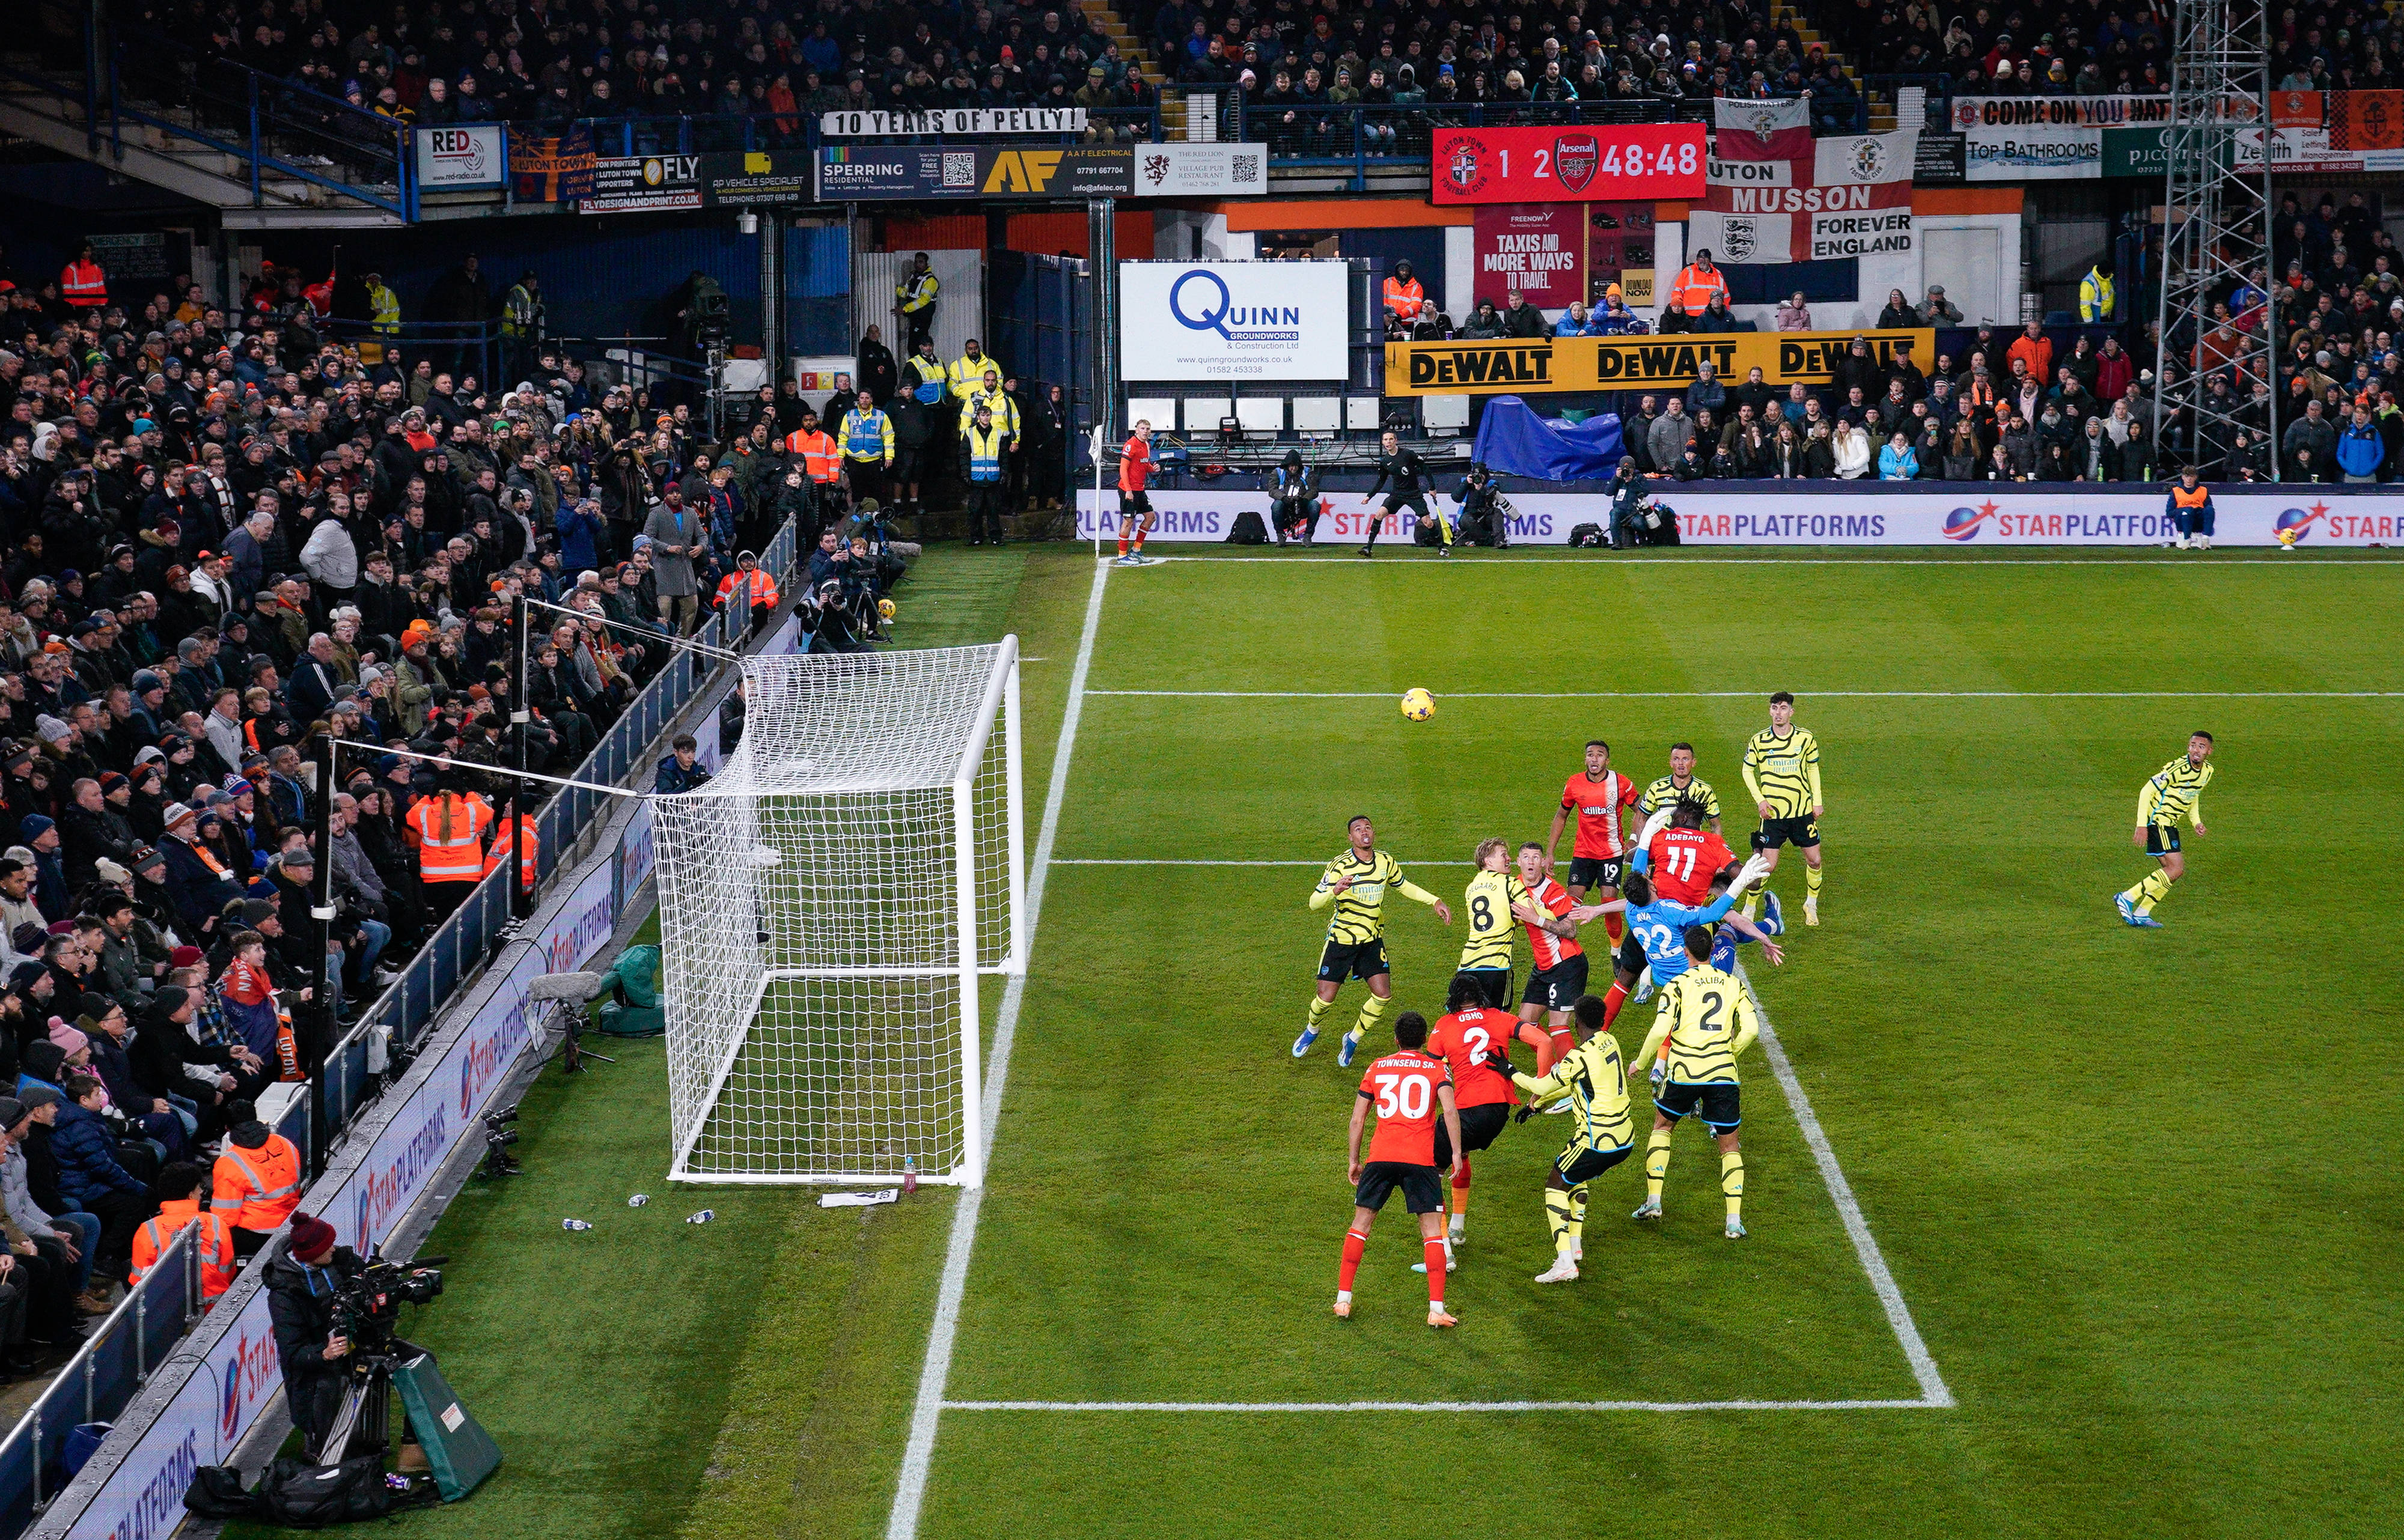 Elijah Adebayo pictured (no.11) scoring for Luton Town against Arsenal during a Premier League game in December 2023